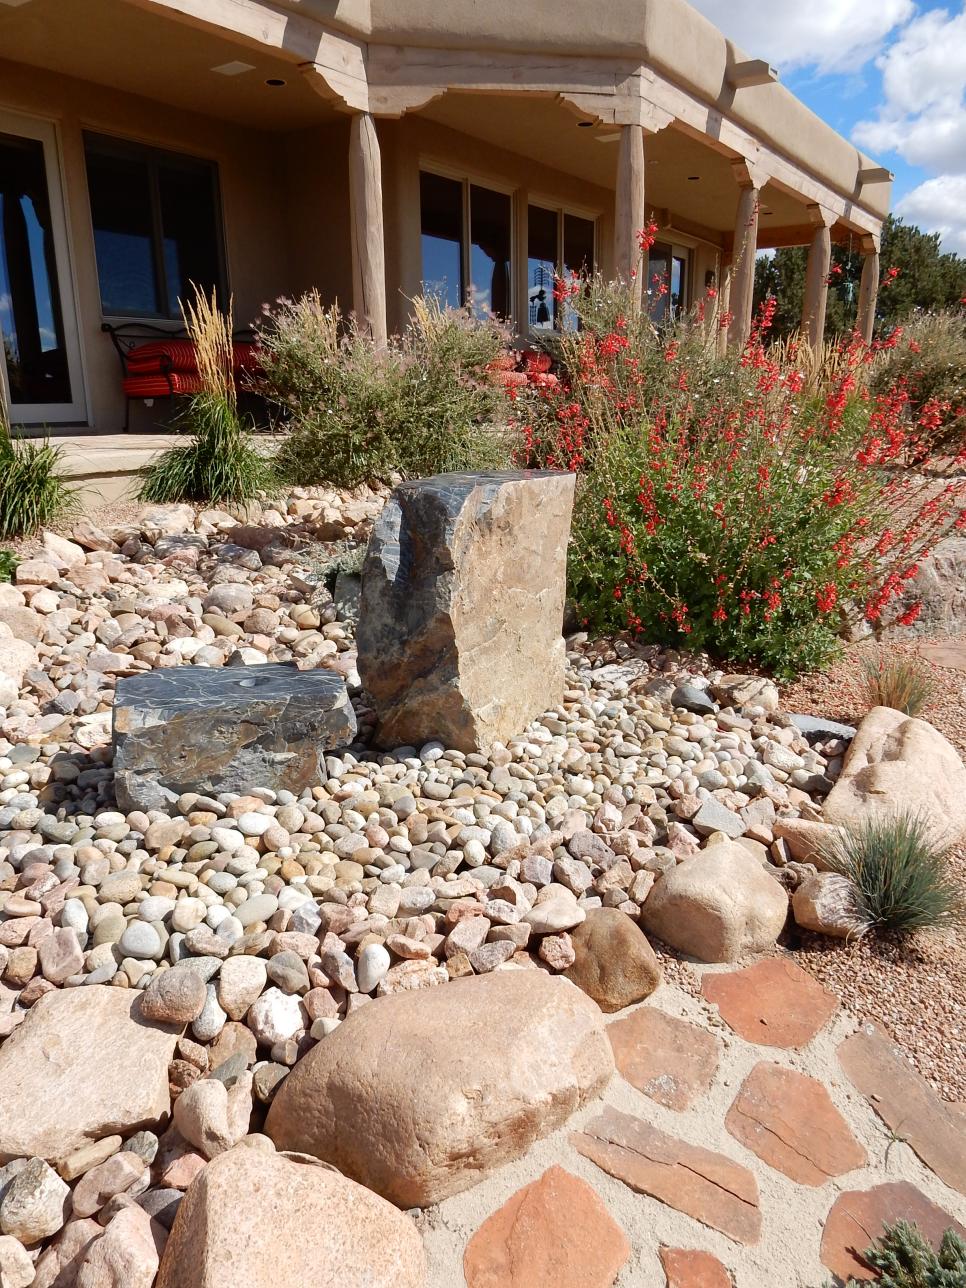 Native, Flowering Plants Add Color to Stone Yard | HGTV